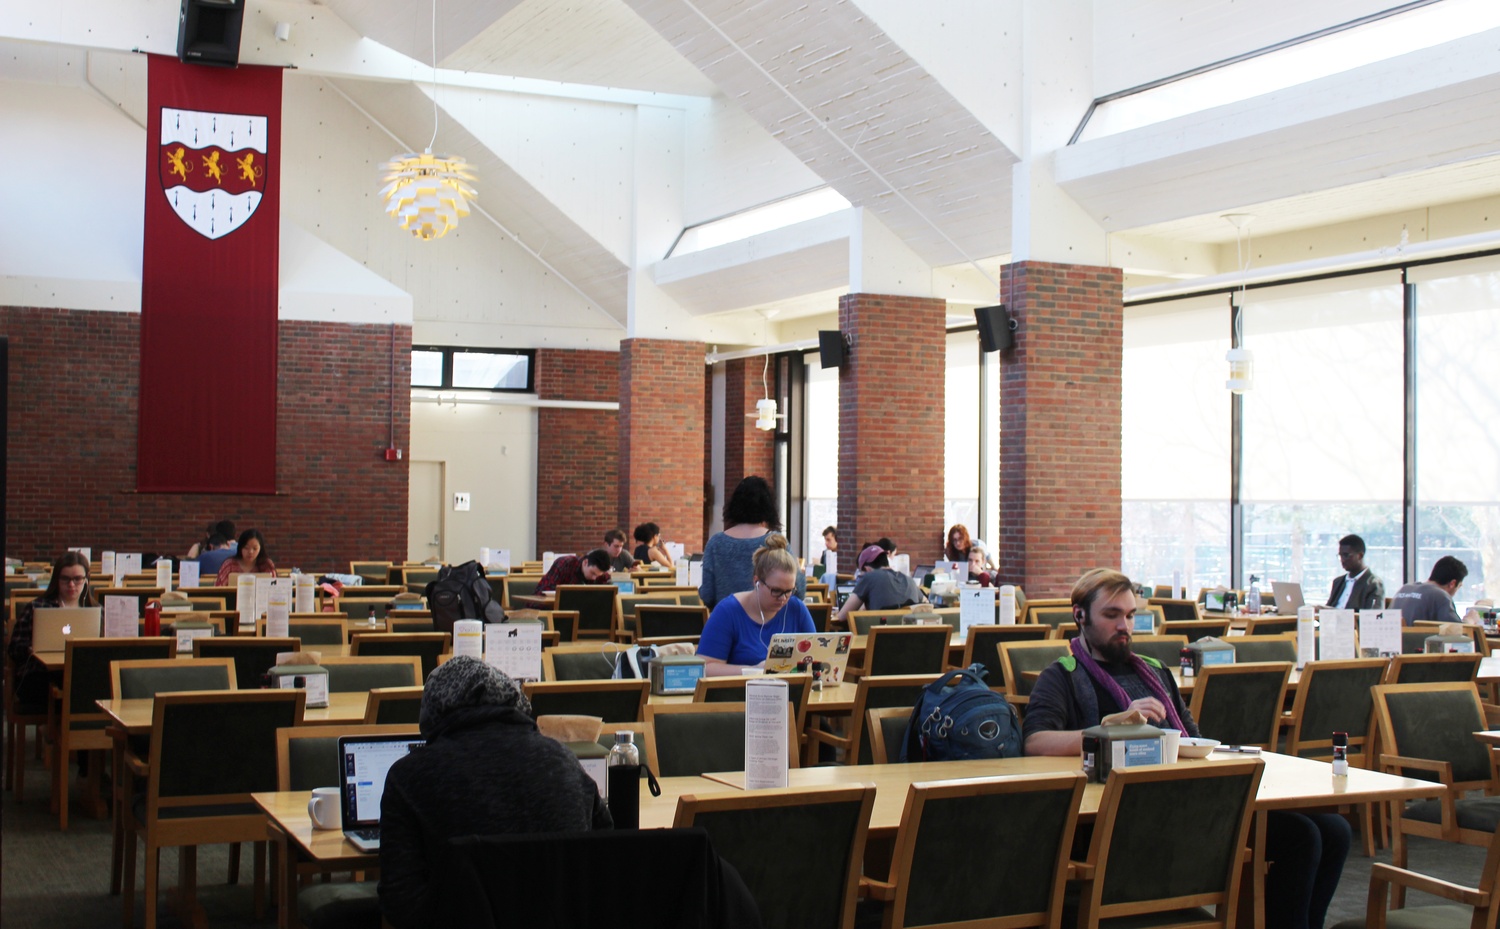 Mather house dining hall with students